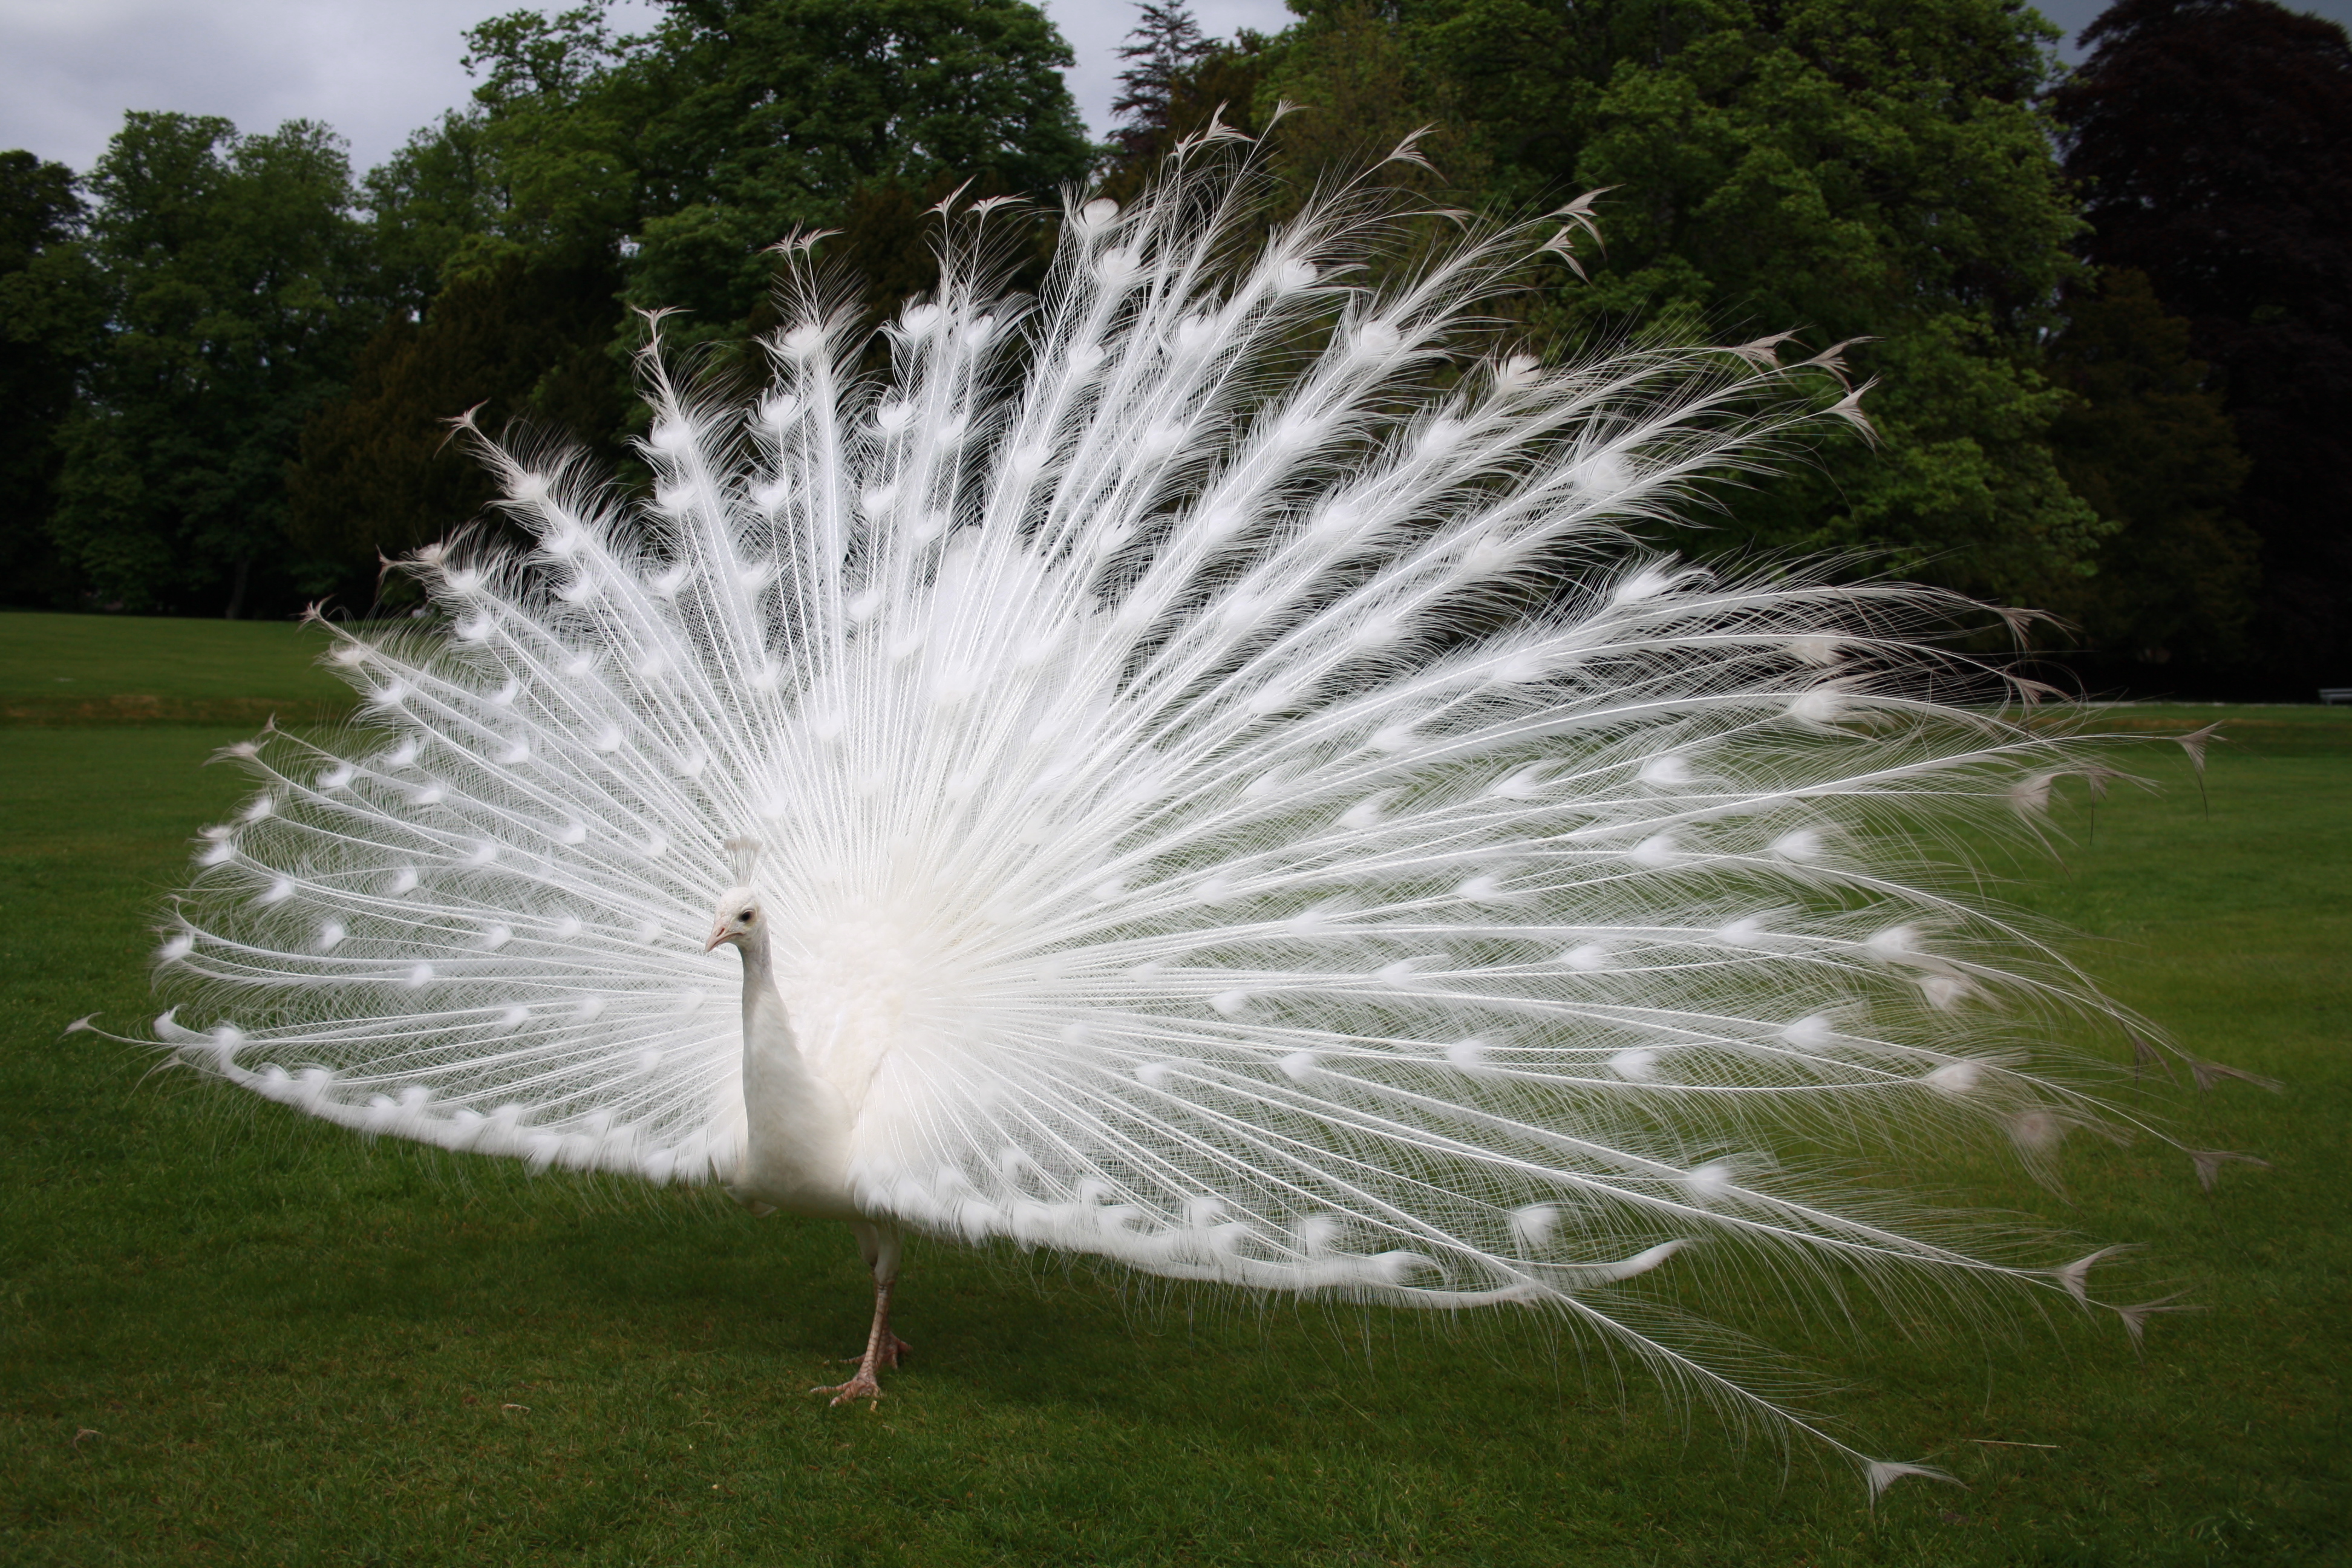 File:White peacock scone palace.JPG - Wikimedia Commons